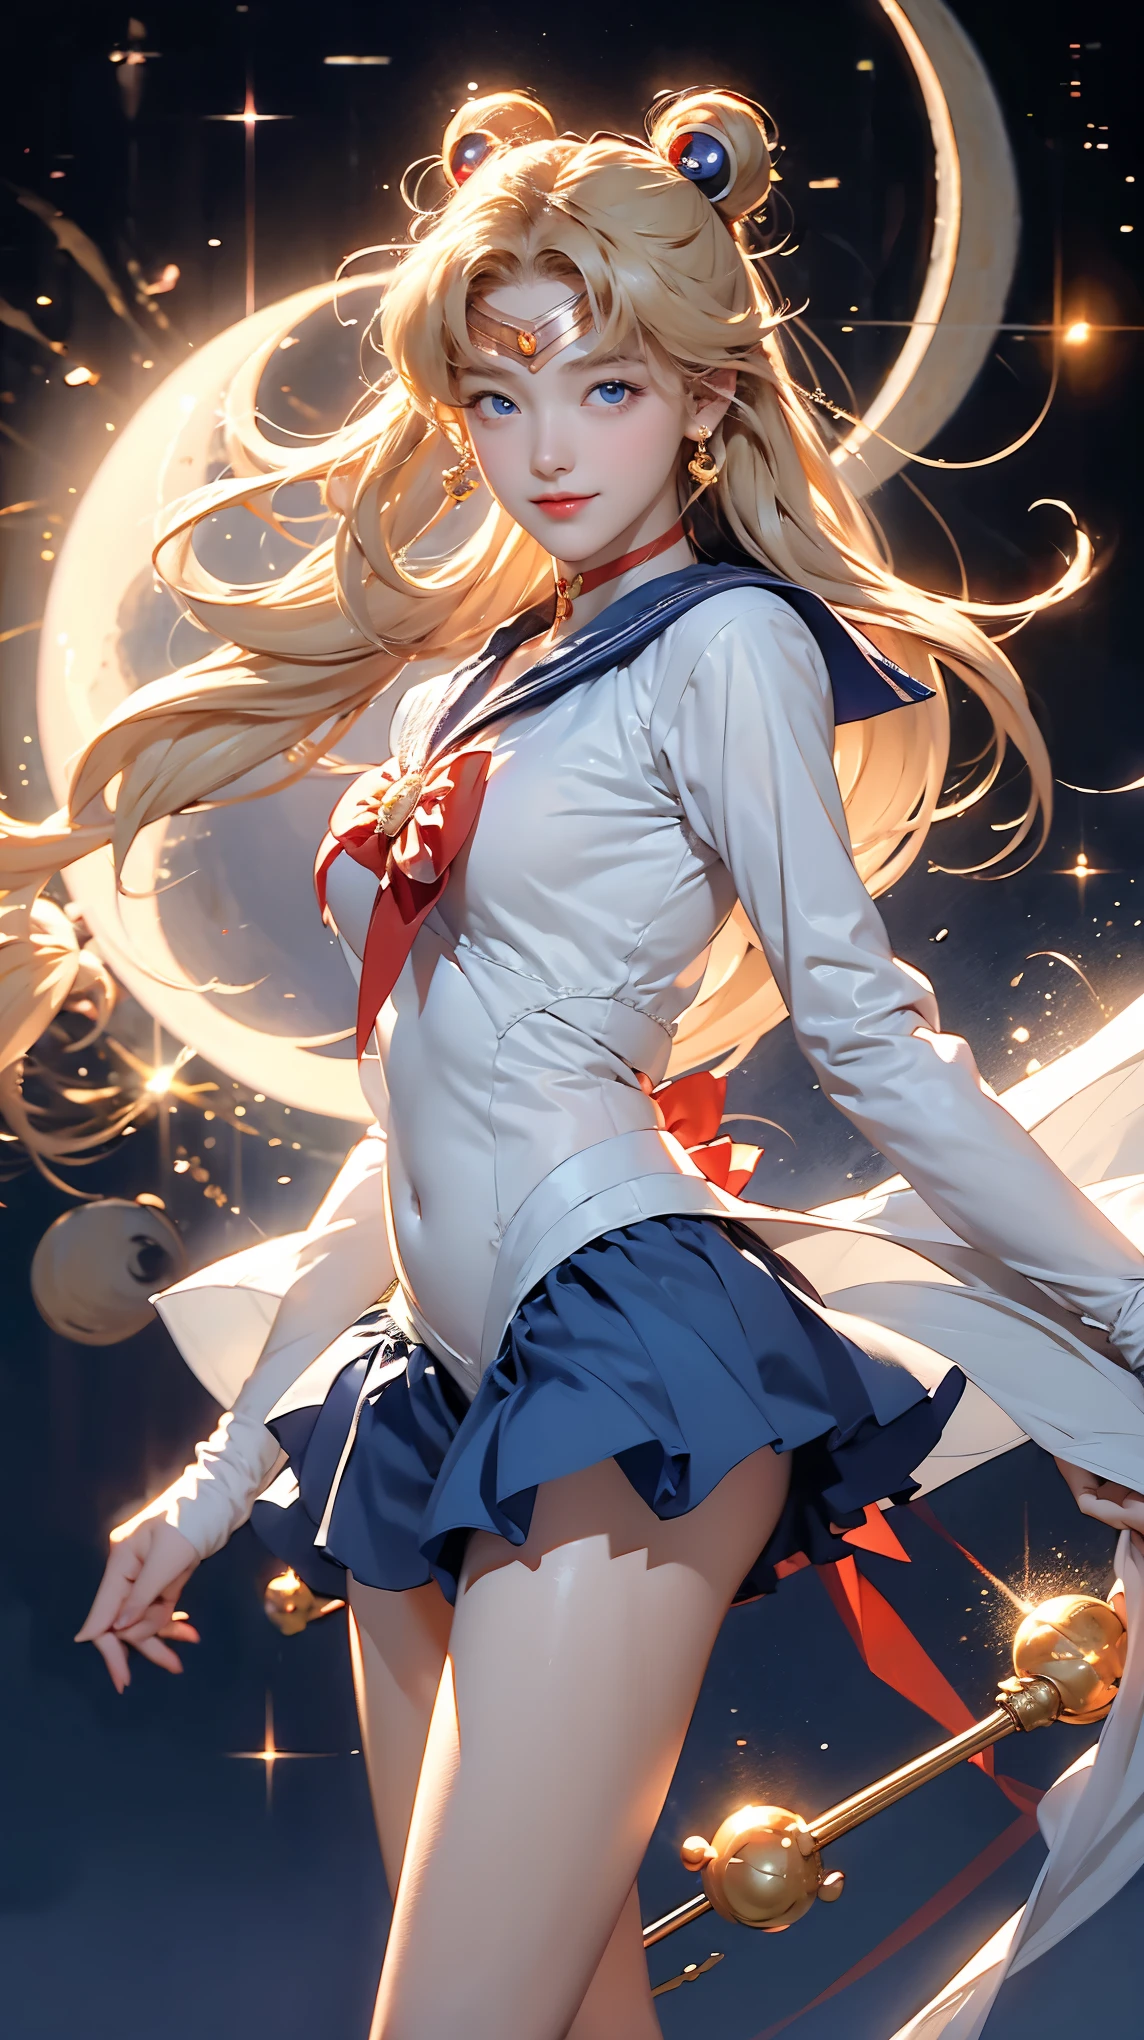 Sailor Moon, 1 girl, blue eyes, Long blond hair, Sailor Suit, moon tiara, Holding the Moon Stick, standing on the moon, earth in background, space, Star, Confident smile.